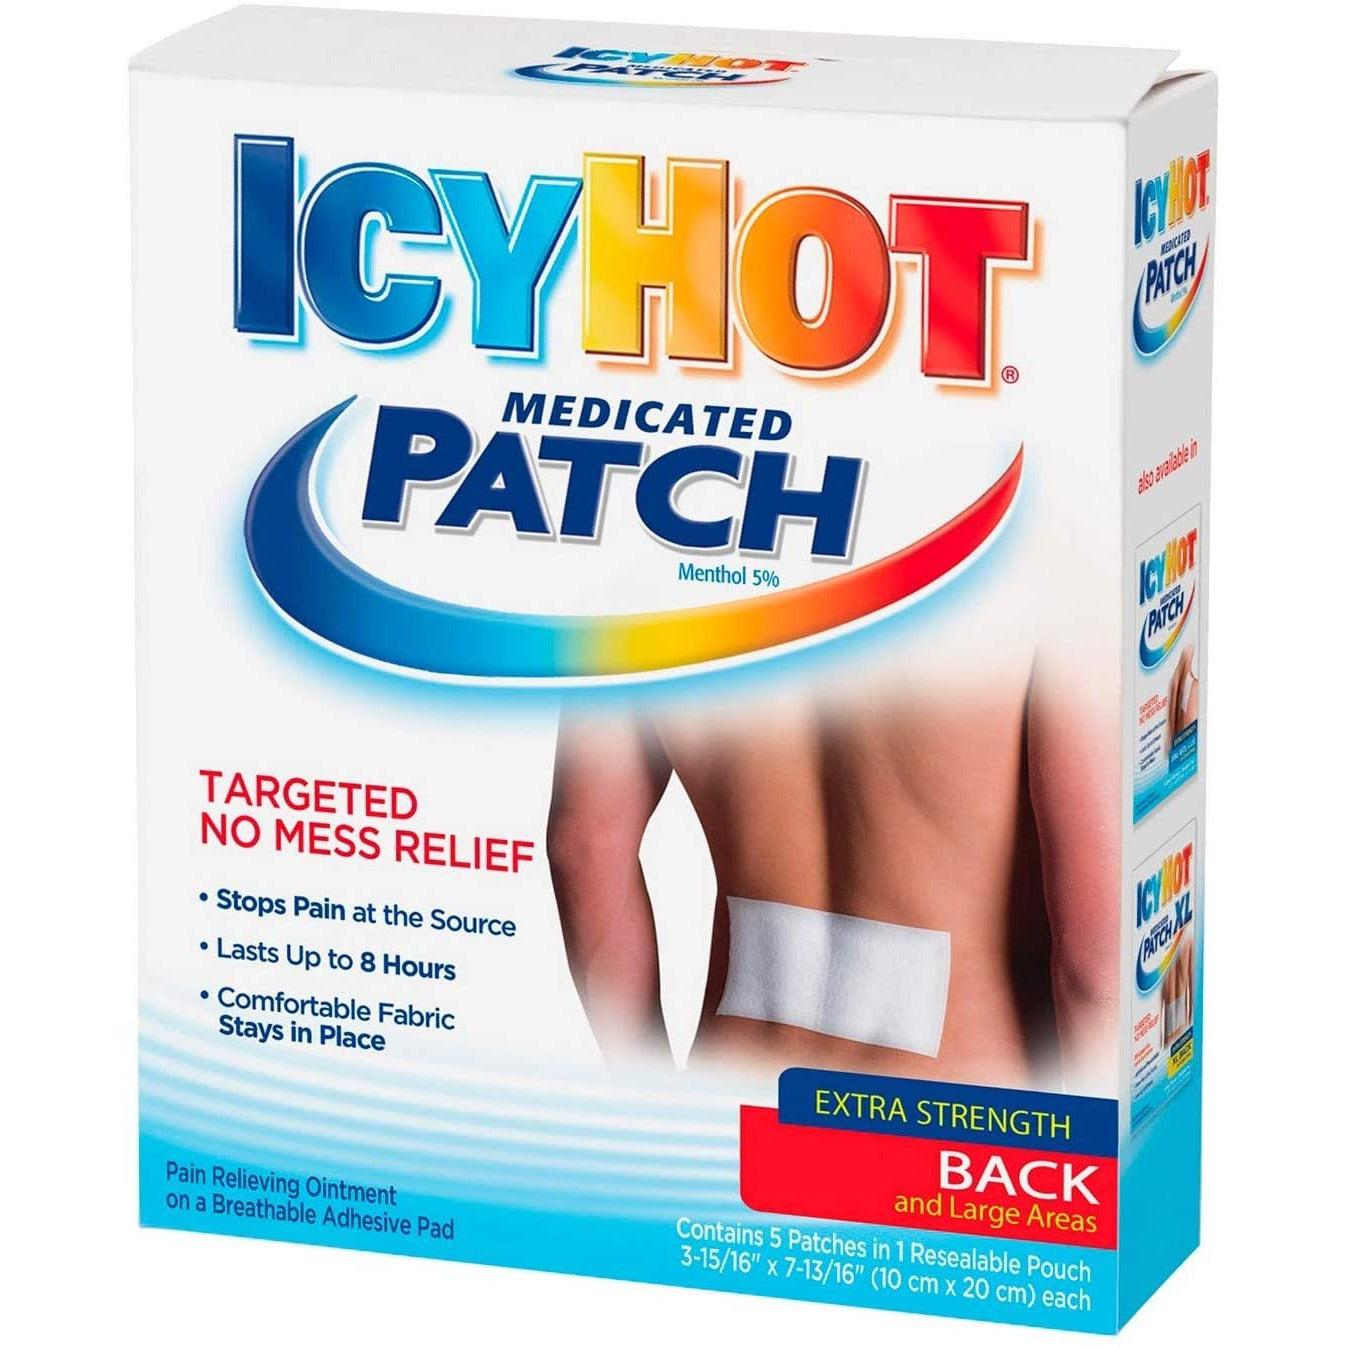 Icy Hot Medicated Patches for Back and Large Areas Extra Strength, 5 Ct